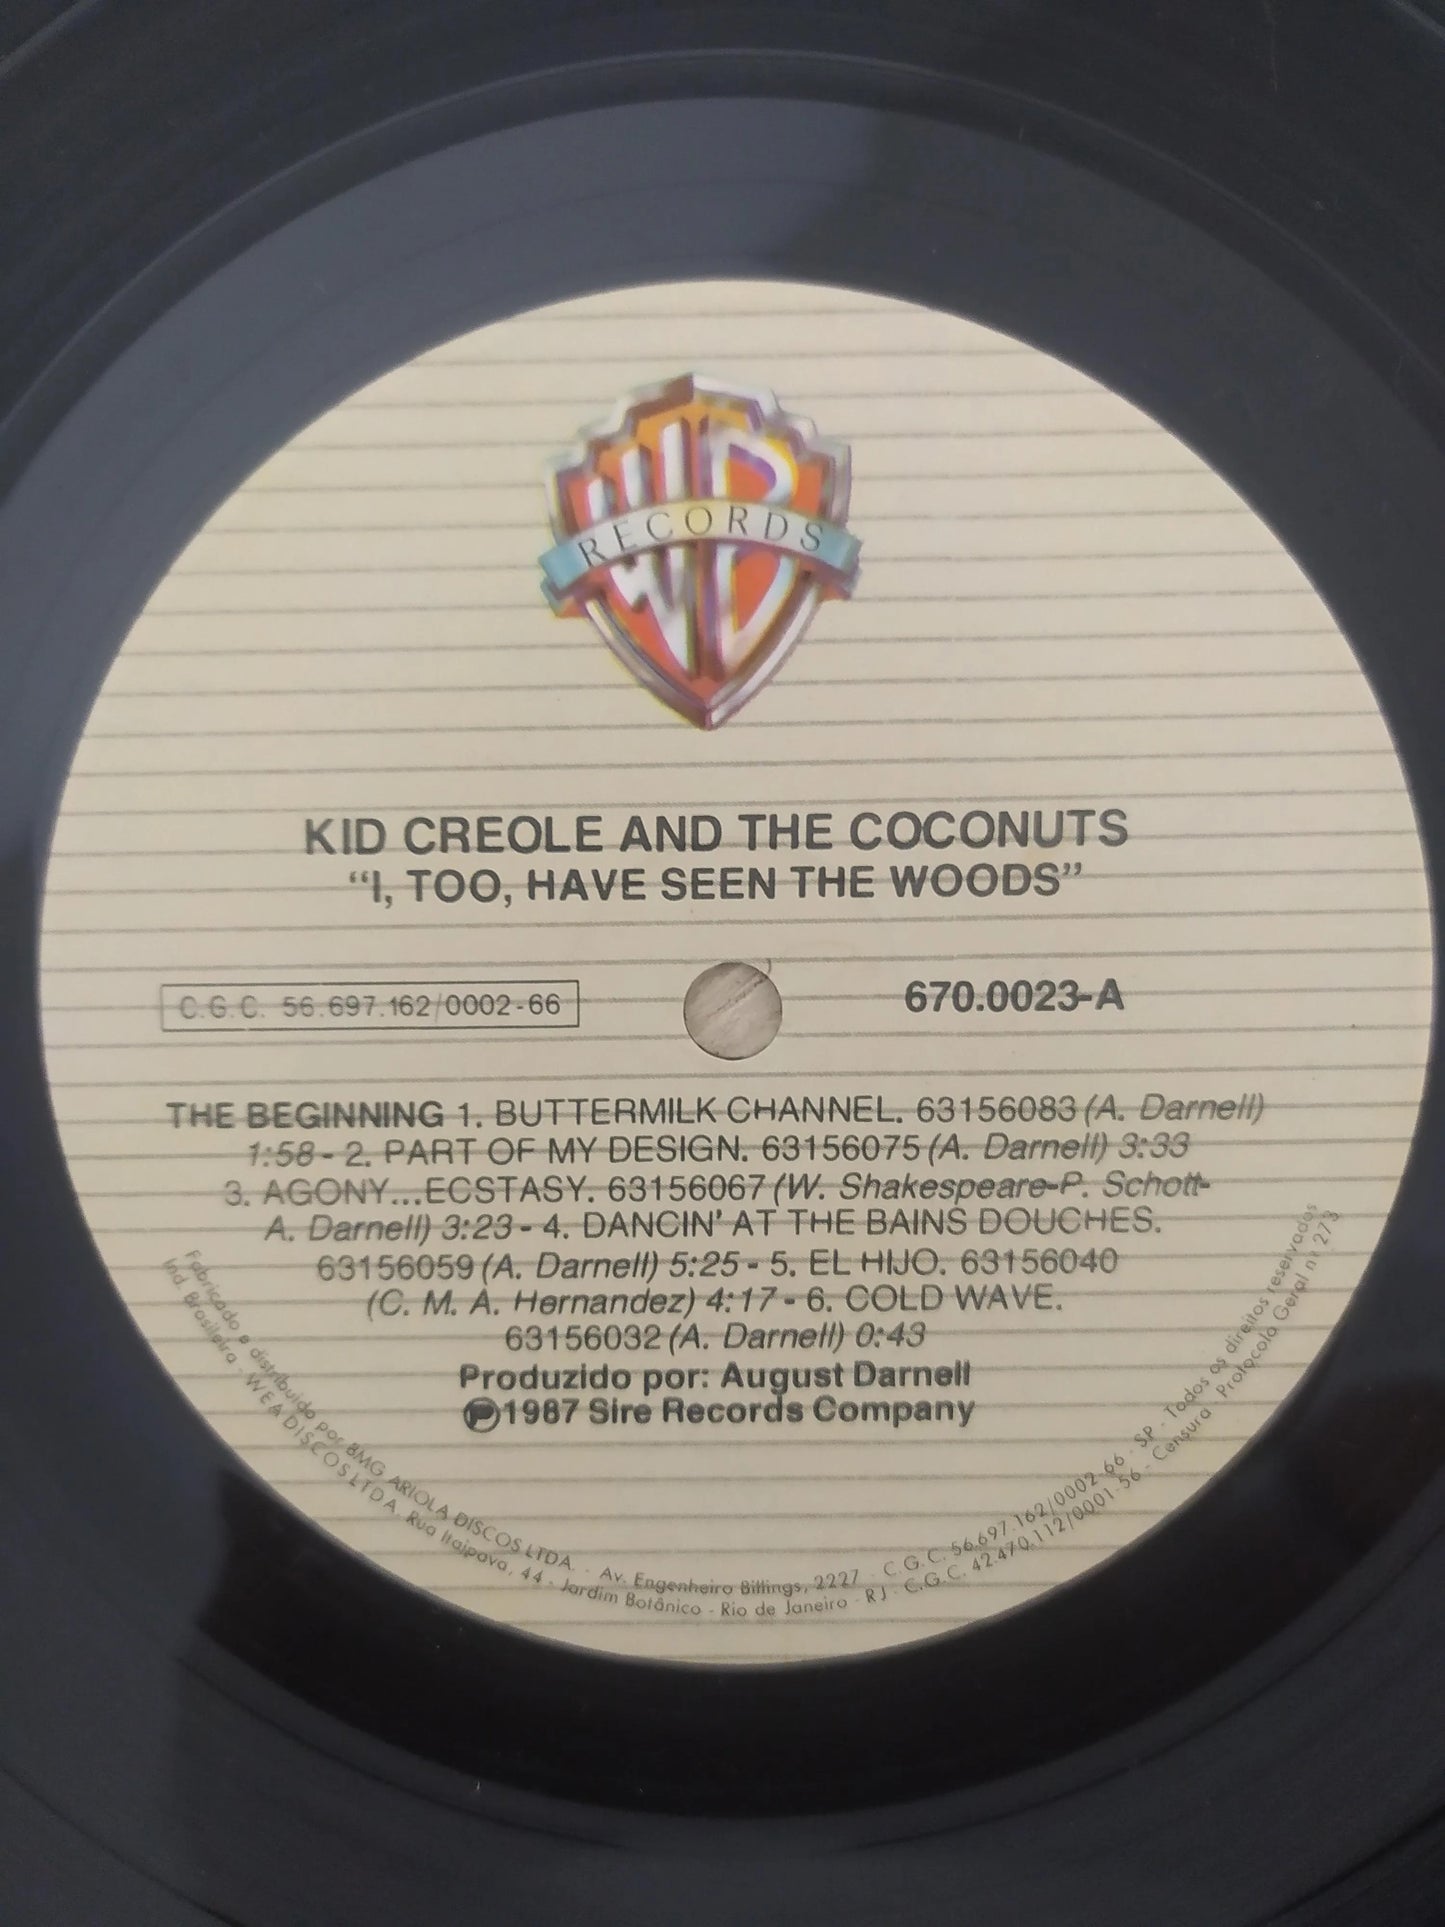 Lp Vinil Kid Creole And The Coconuts I, Too, Have Seen The Woods Com Encarte